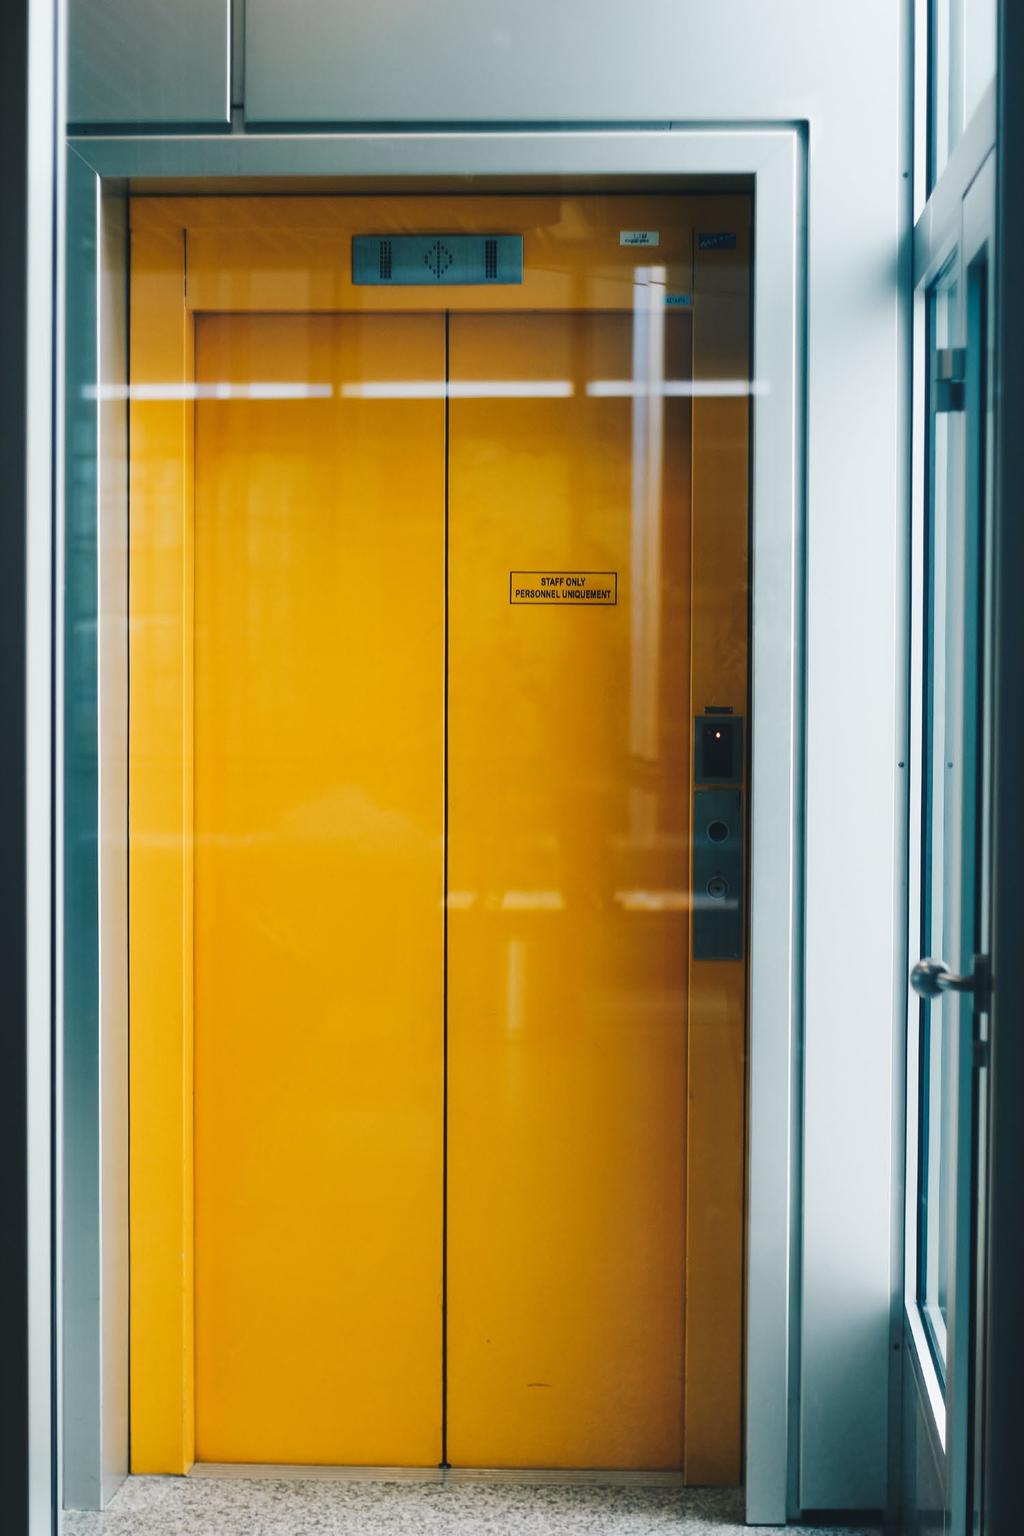 Updating your Elevator Your pitch should include: 1. - An opening hook to grab attention and provoke questions 2. An introduction that tells your name and describes what you do (with enthusiasm) 3.